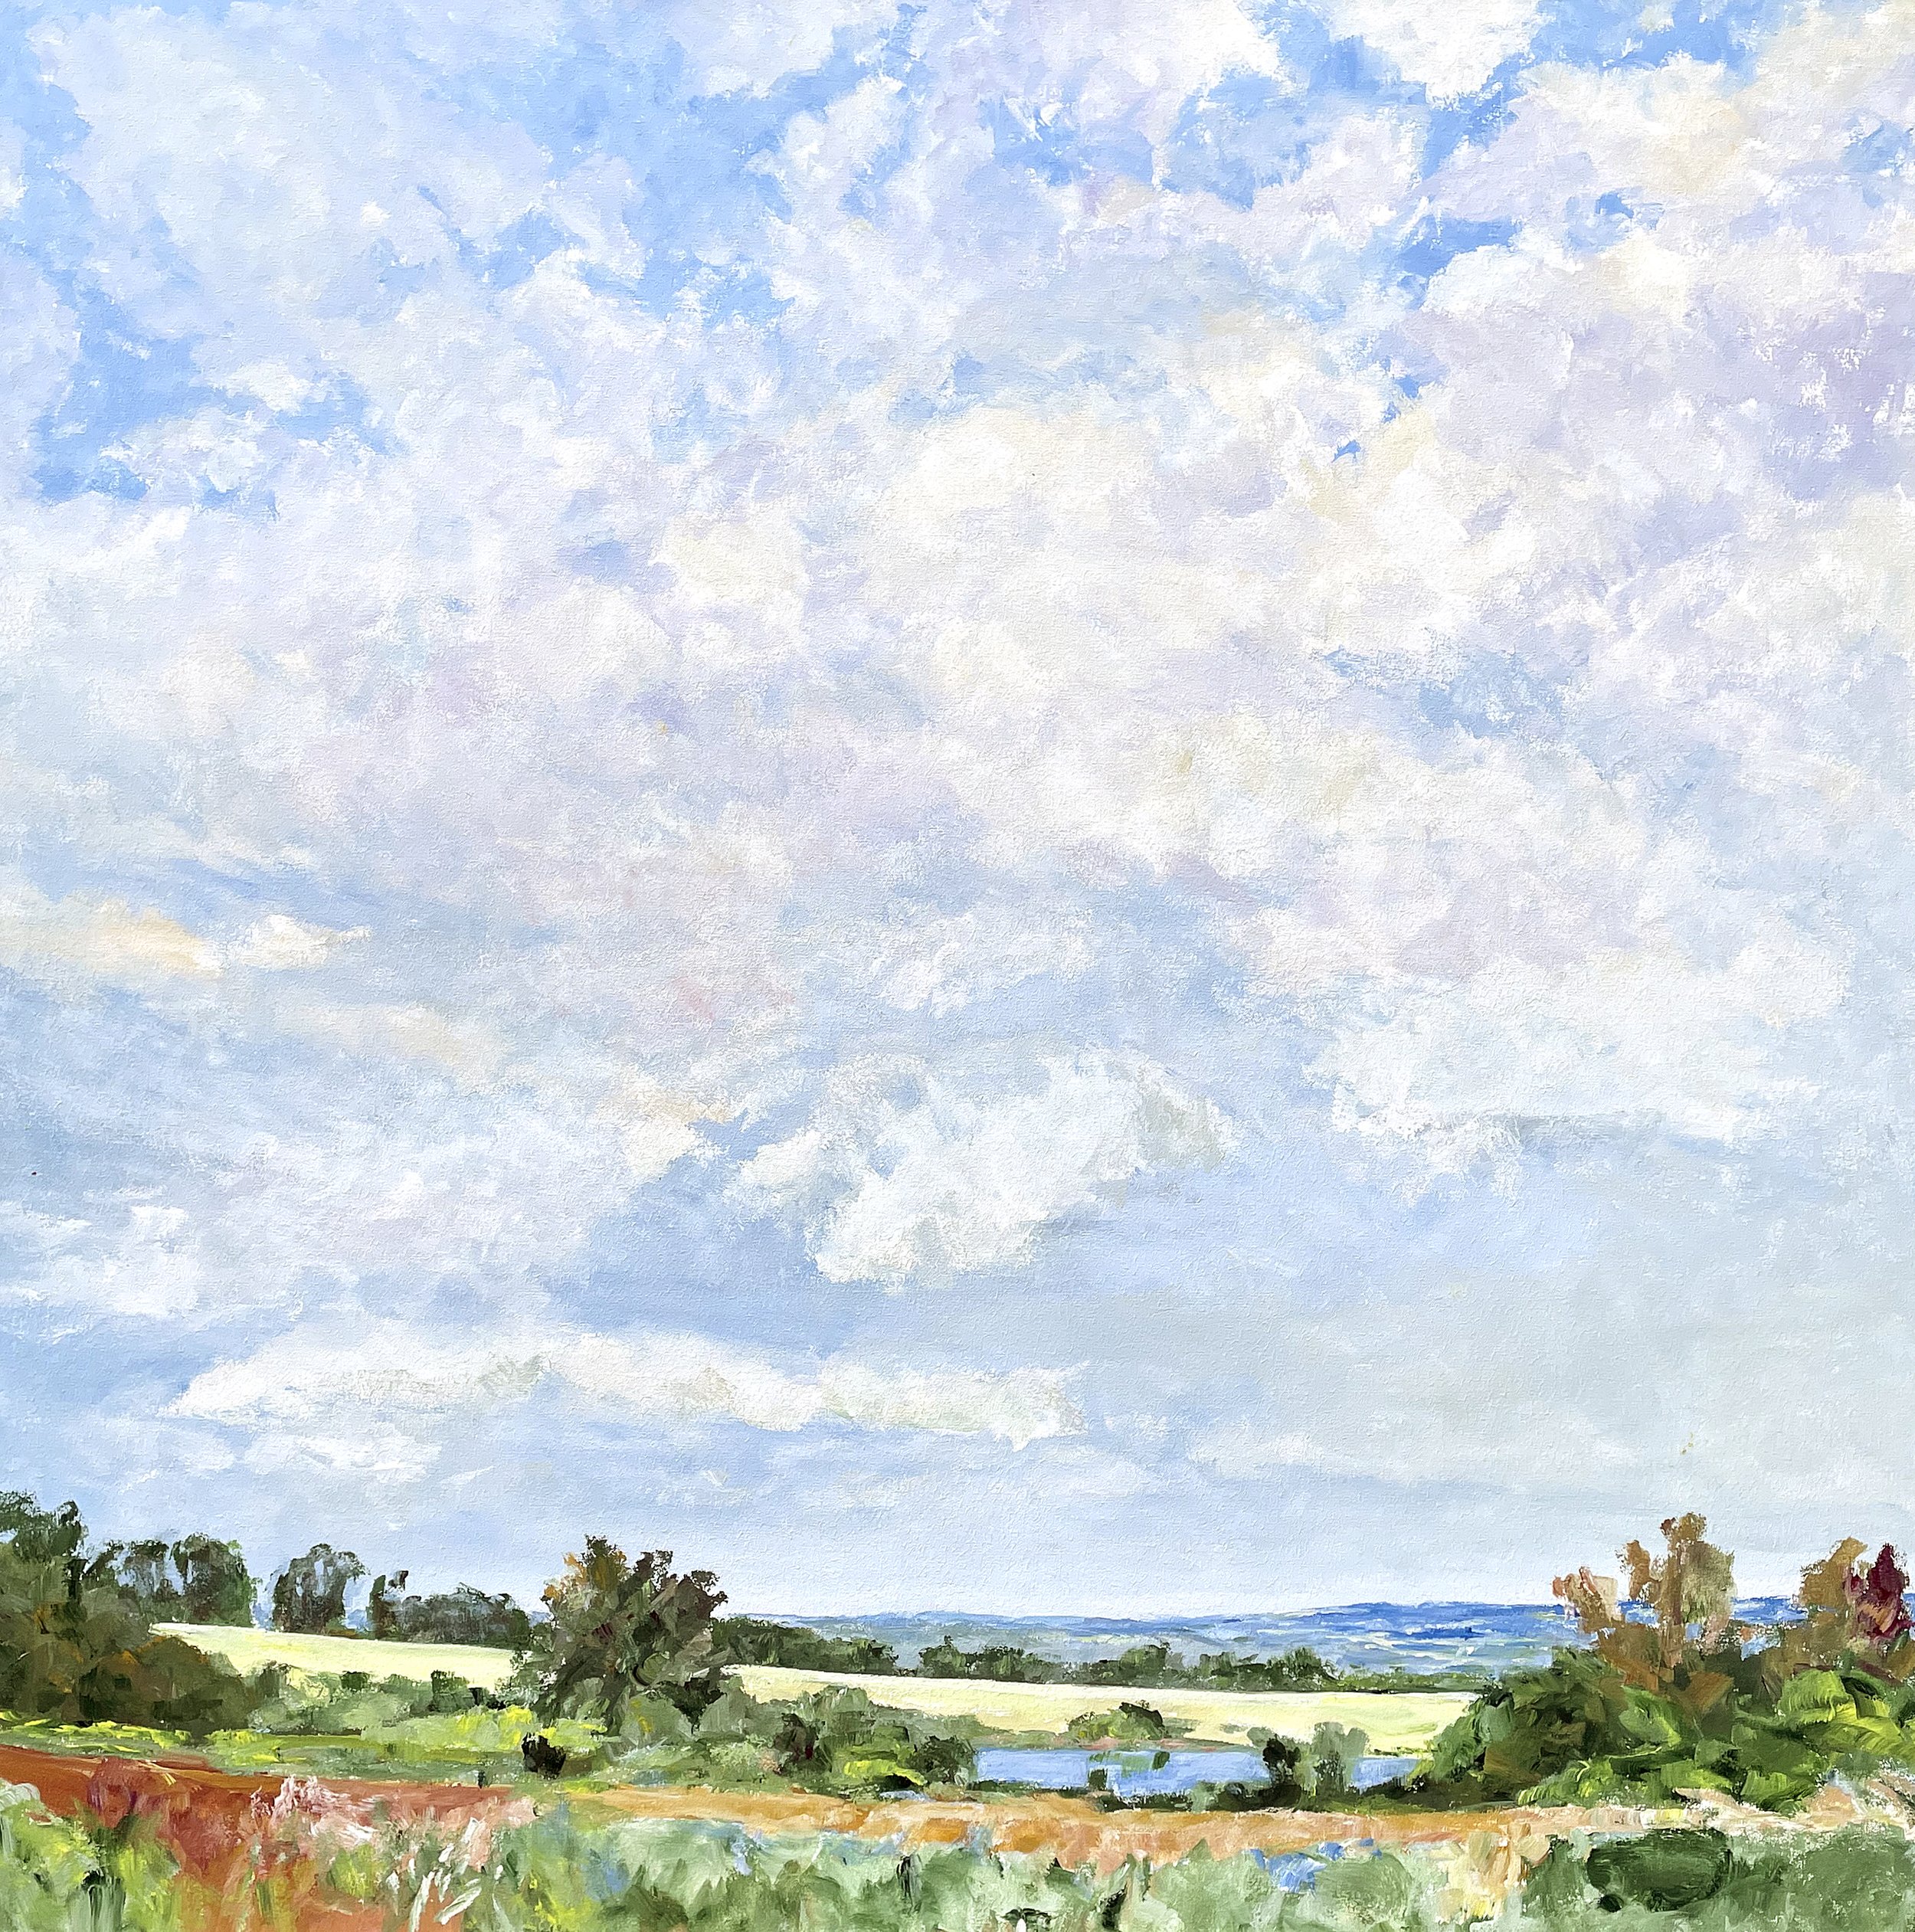 Northern Fields Distant Hills, 1999, 48 x 48 in., acrylic on canvas 